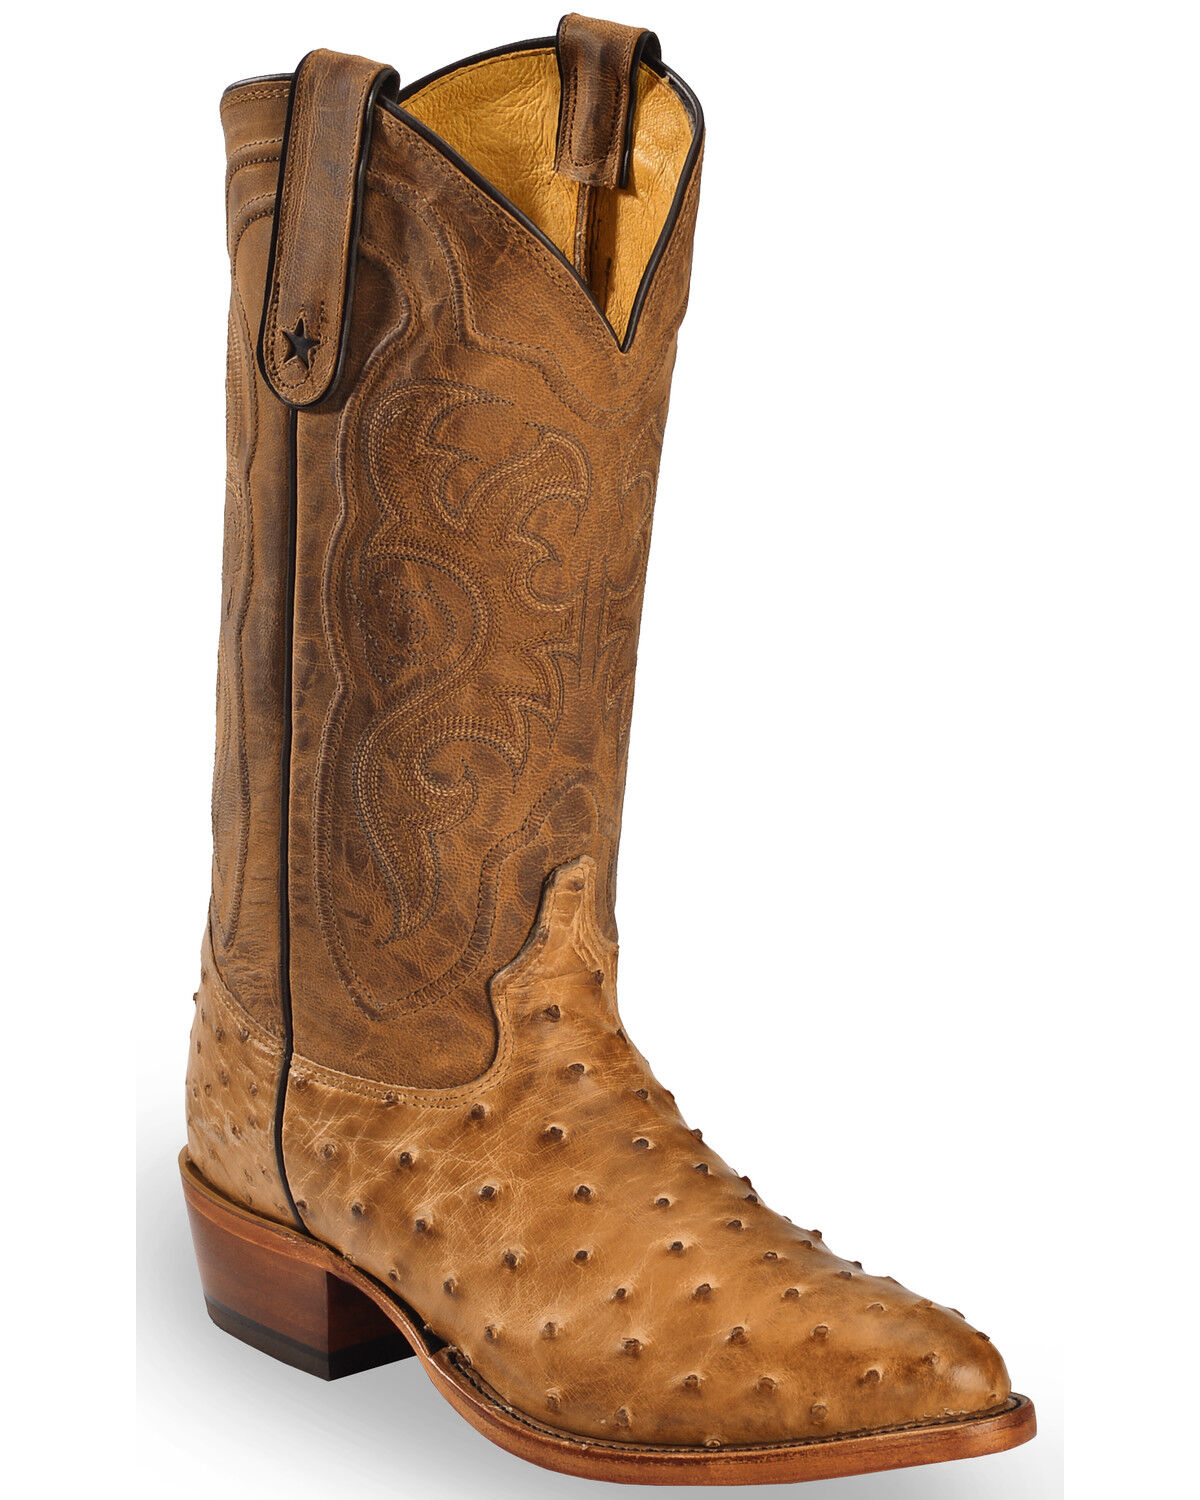 quill boots